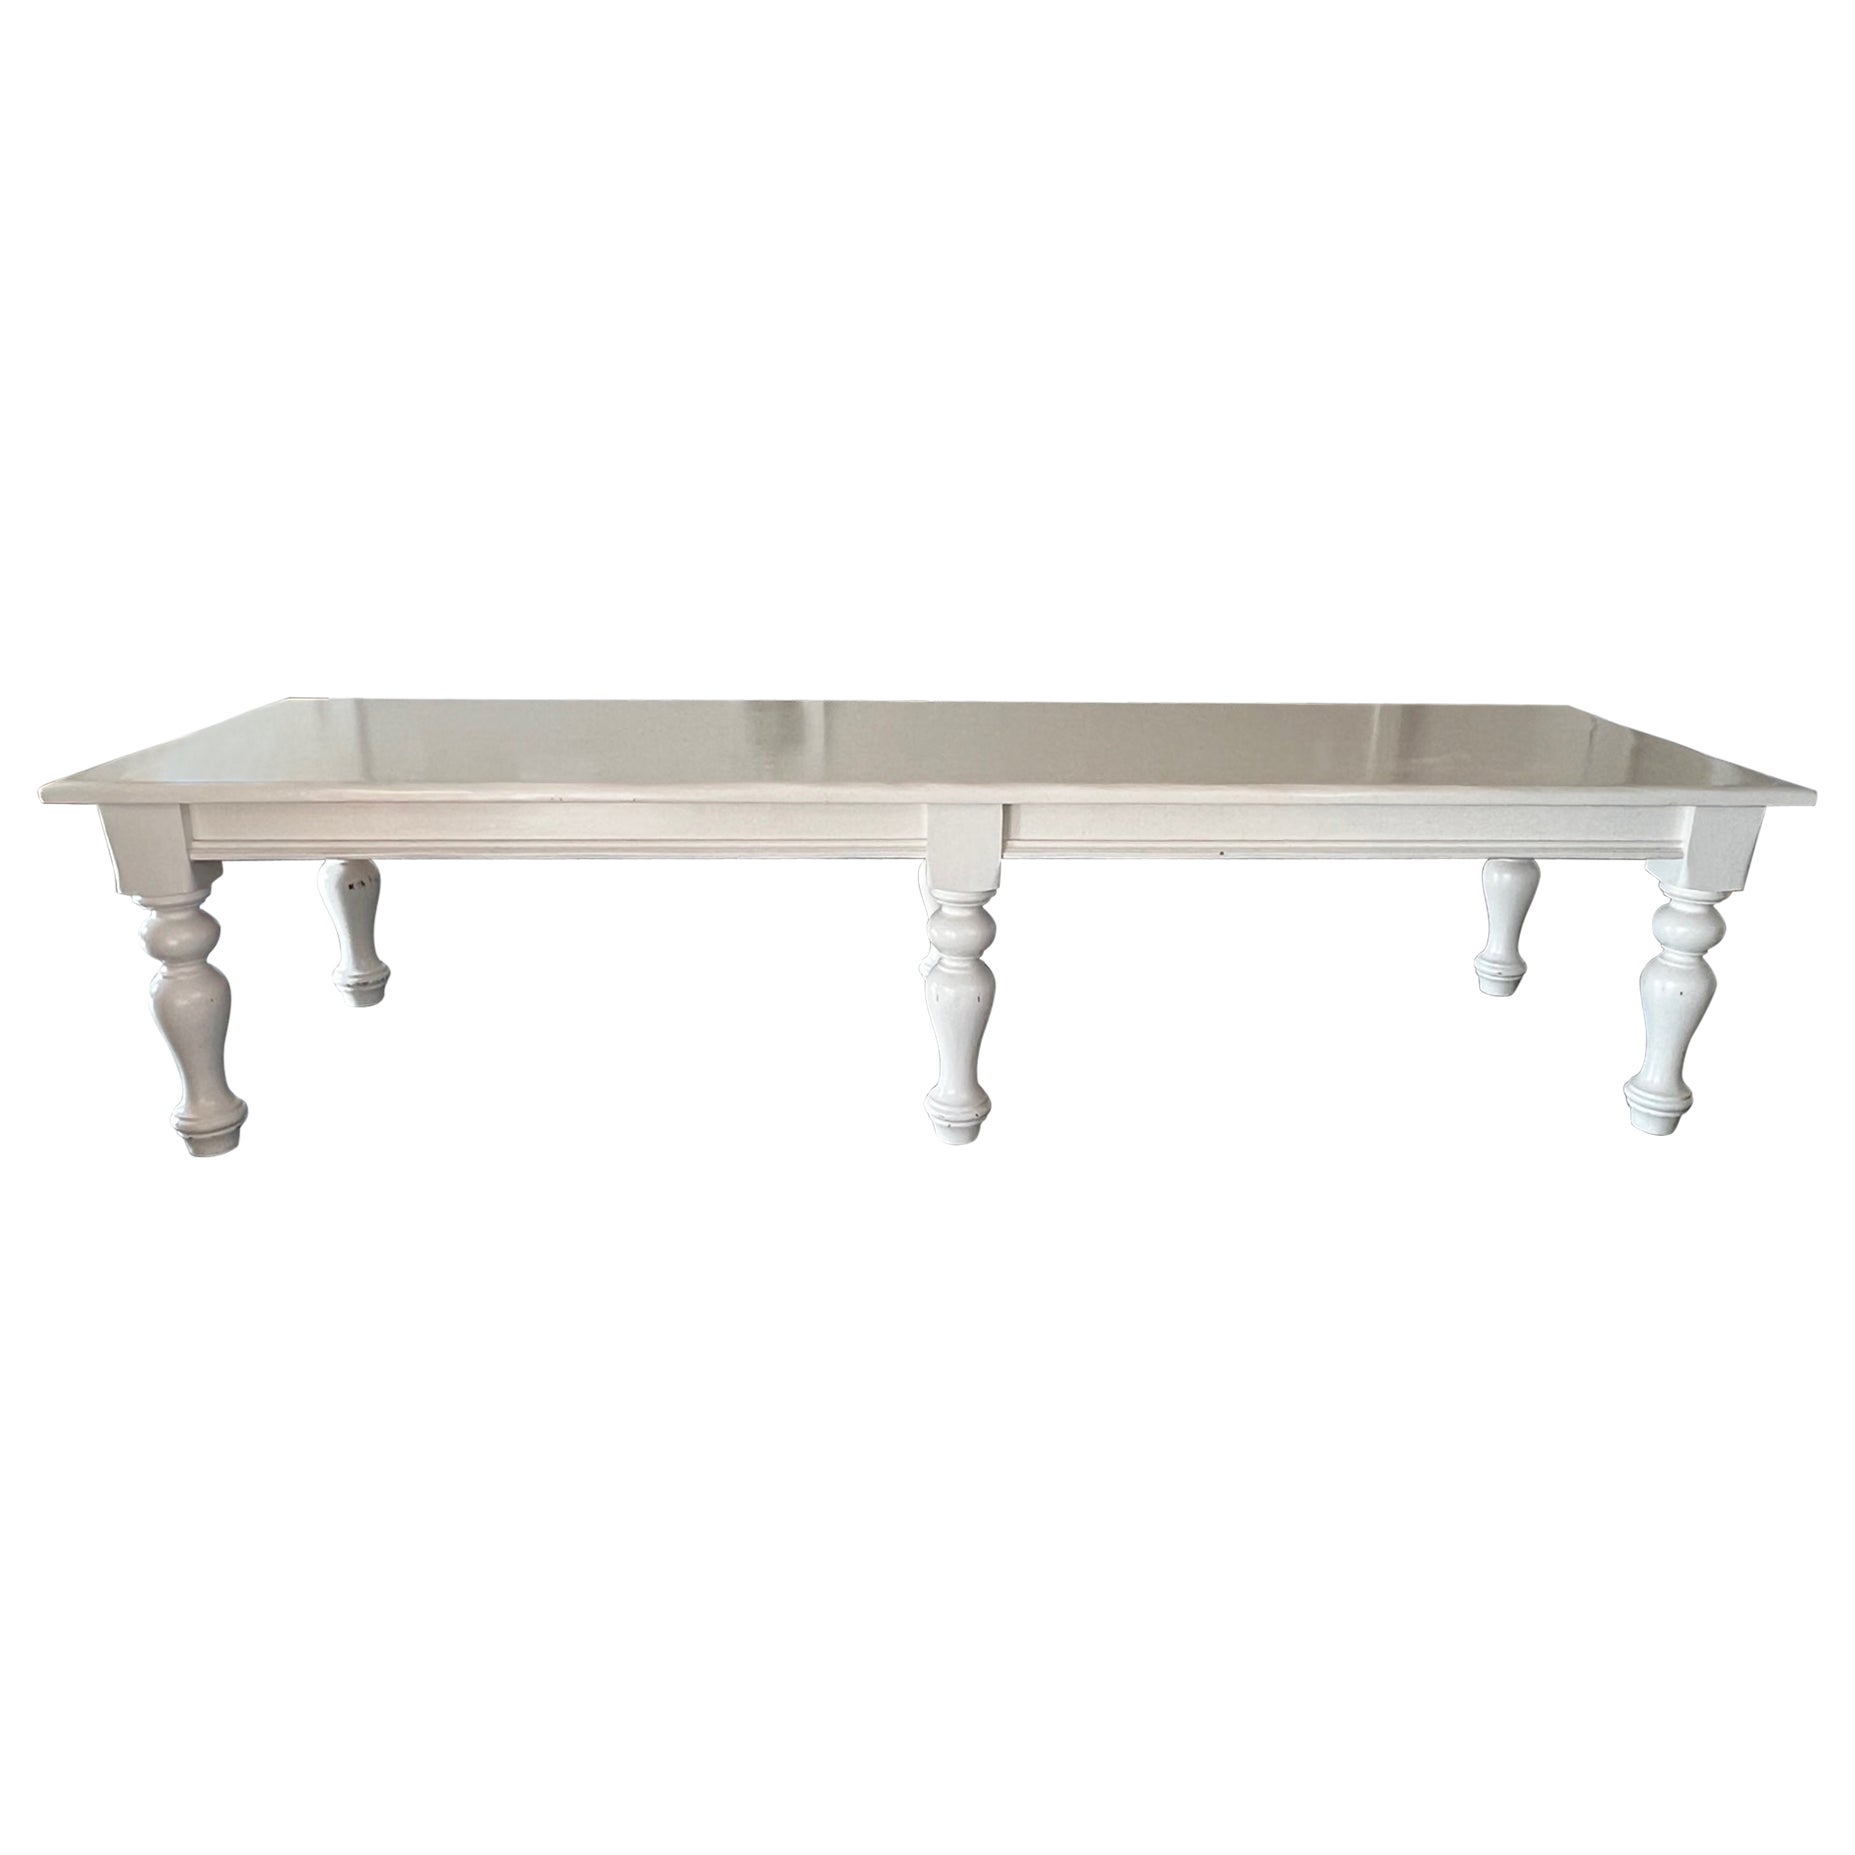 Monumental French Country Style White Painted Farm Table